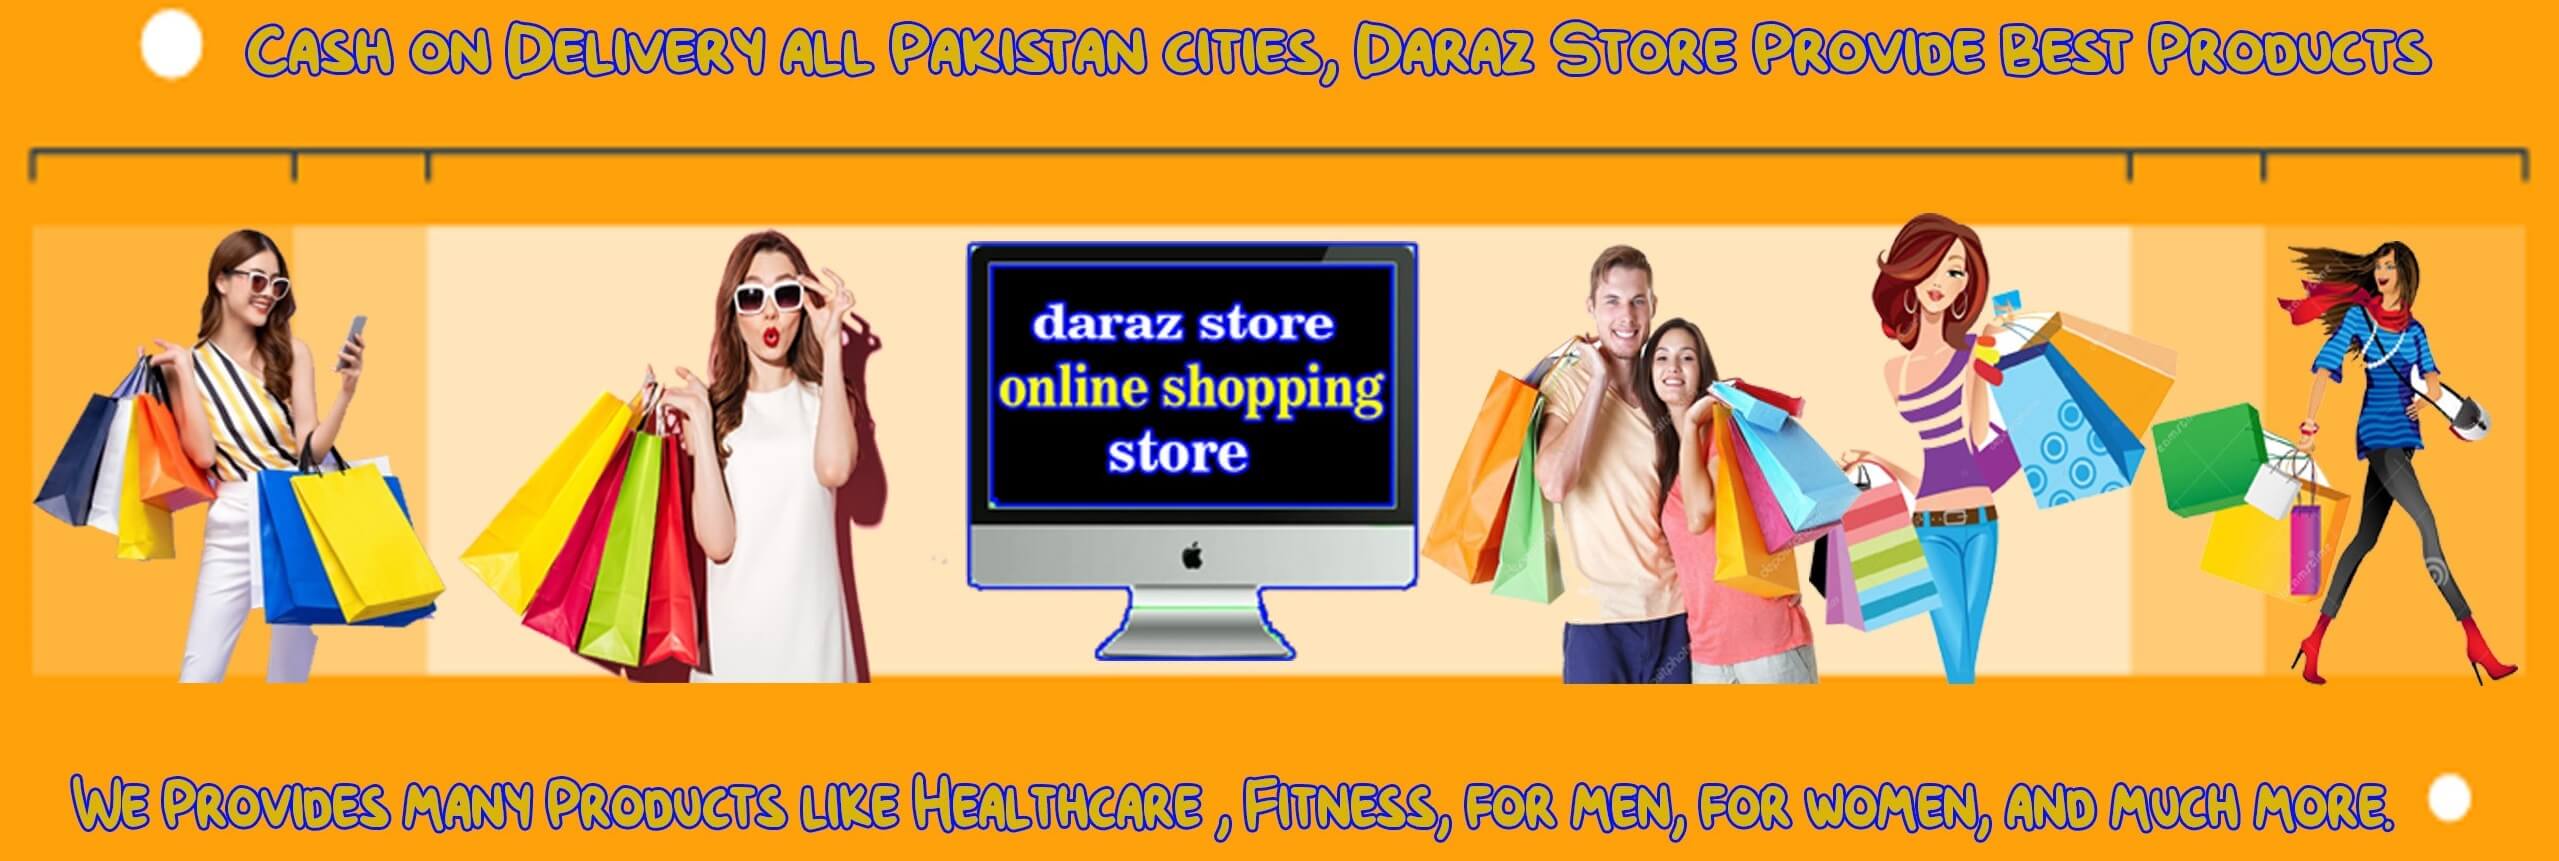 shop-daraz-store-online-shopping-network-cash-on-delivery-pakistan